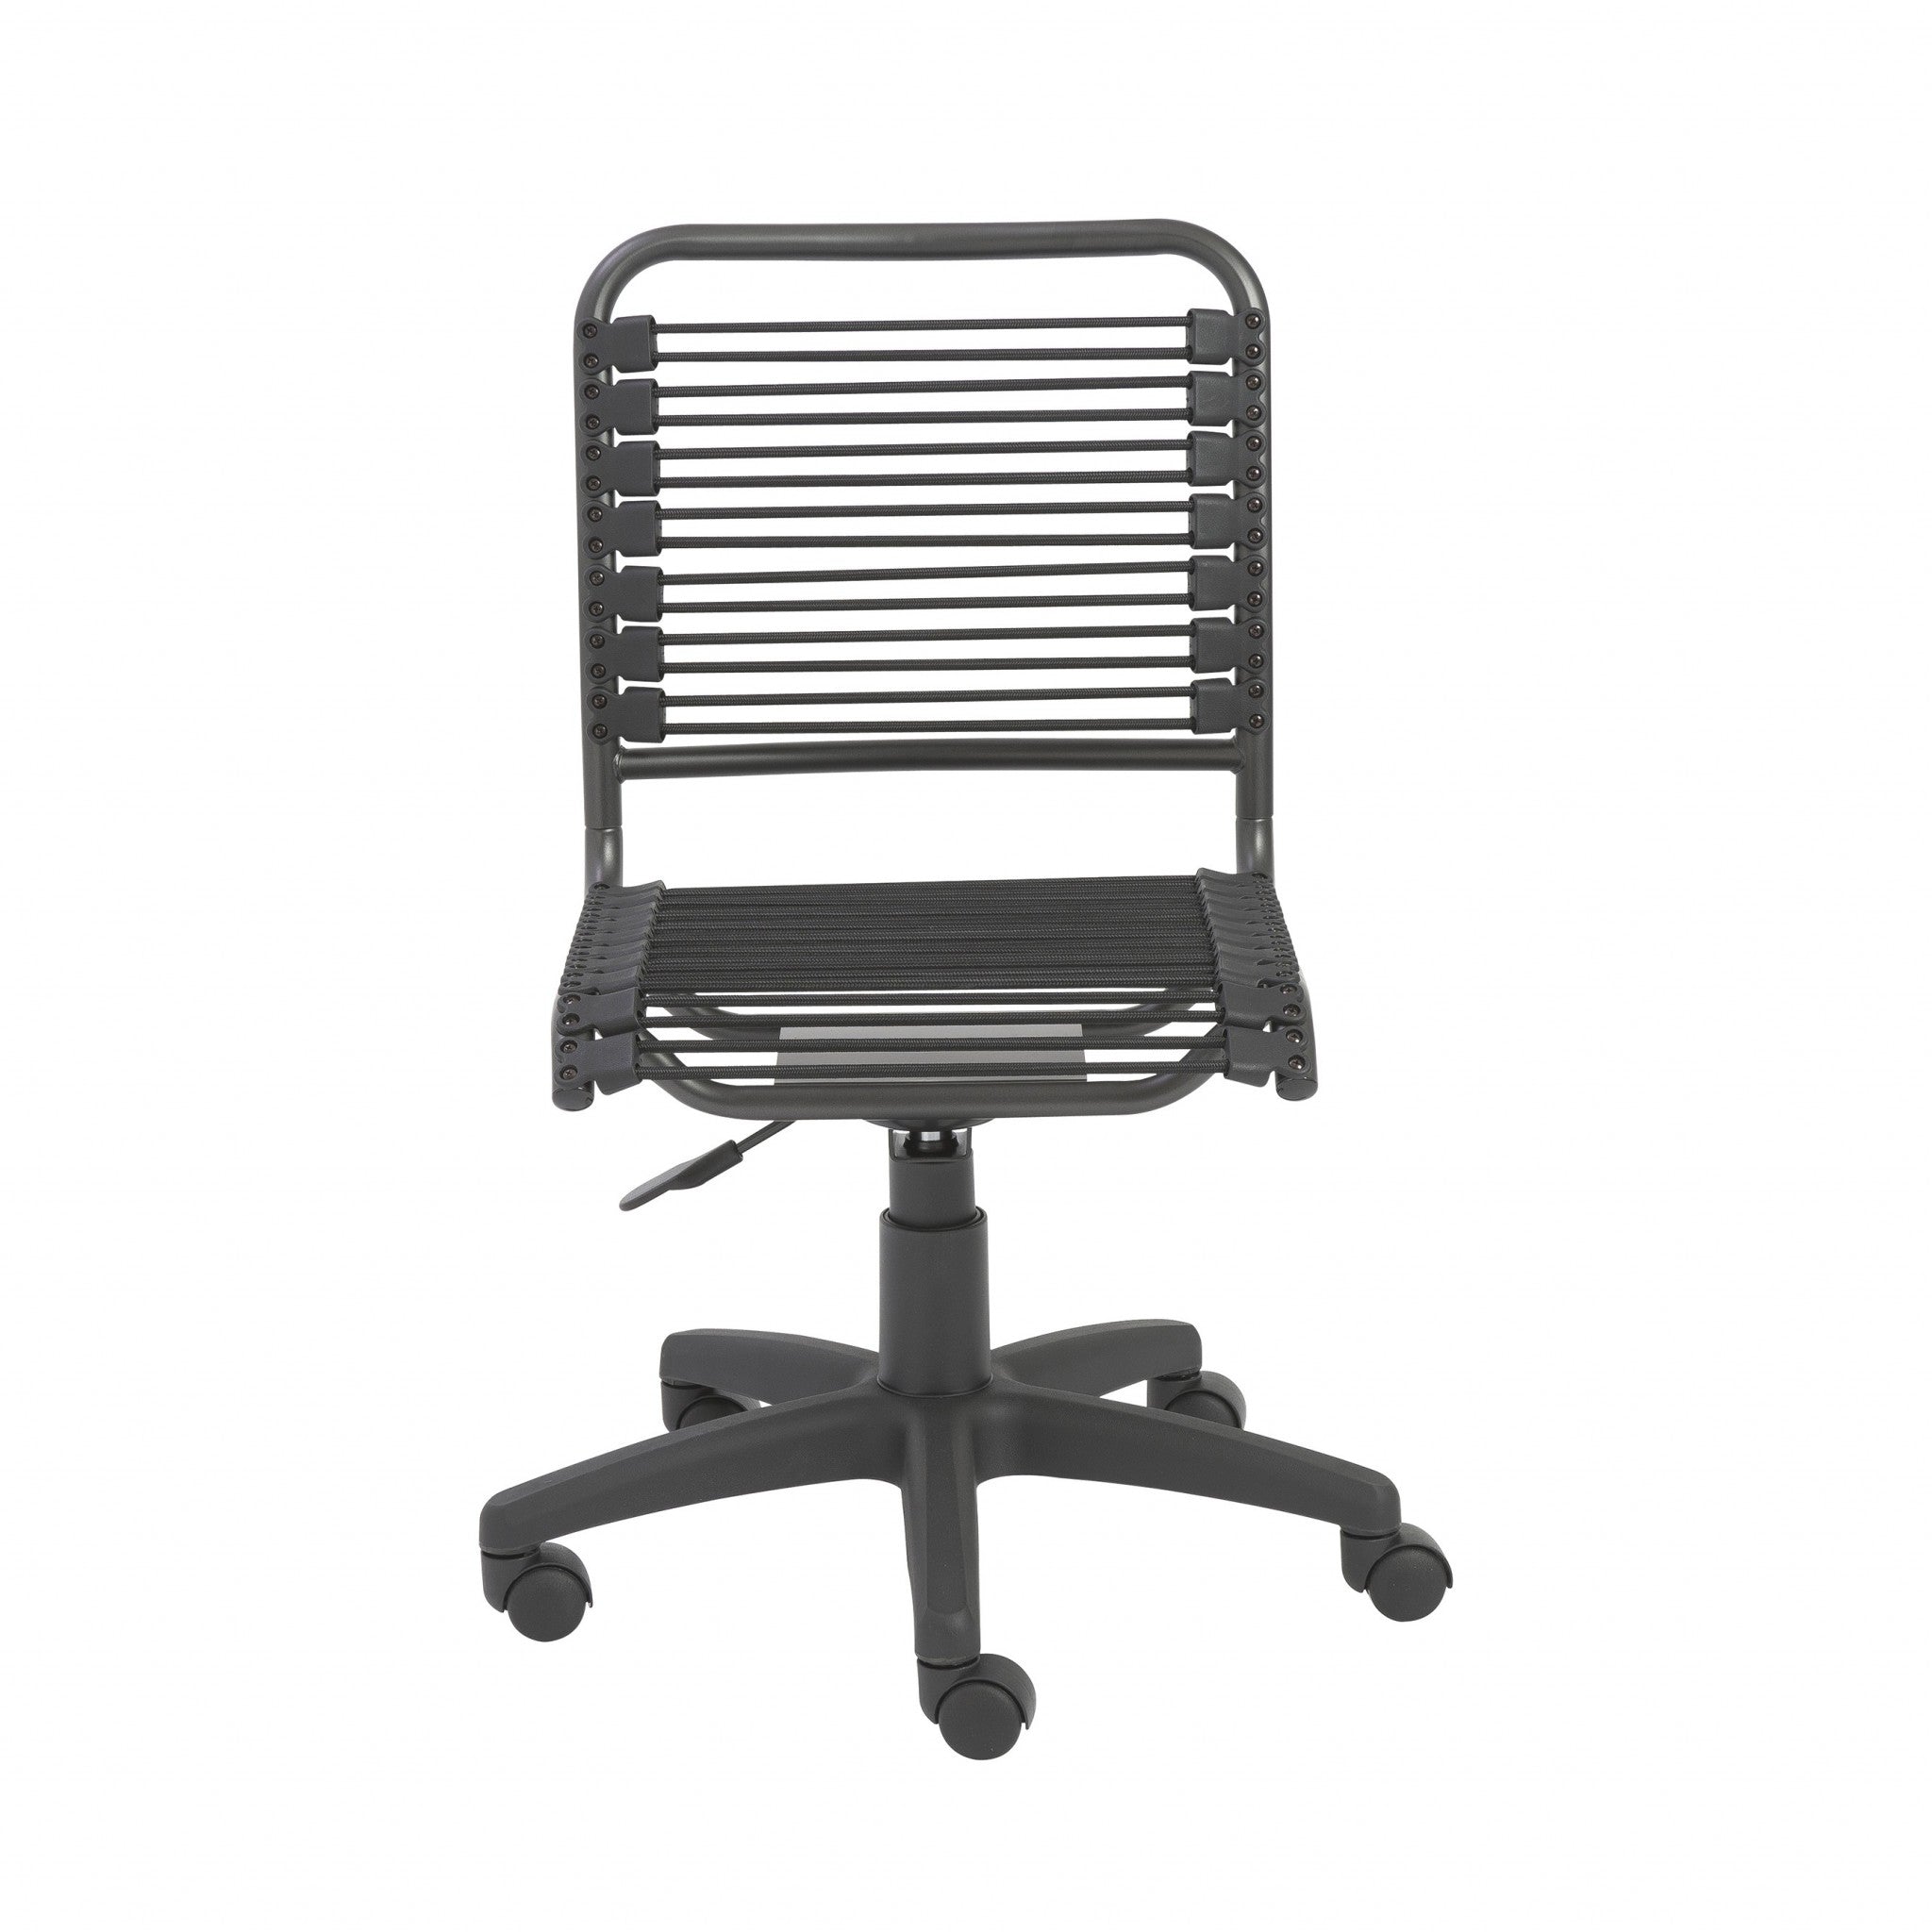 Black Adjustable Height Swivel Bungee Rolling Office Chair